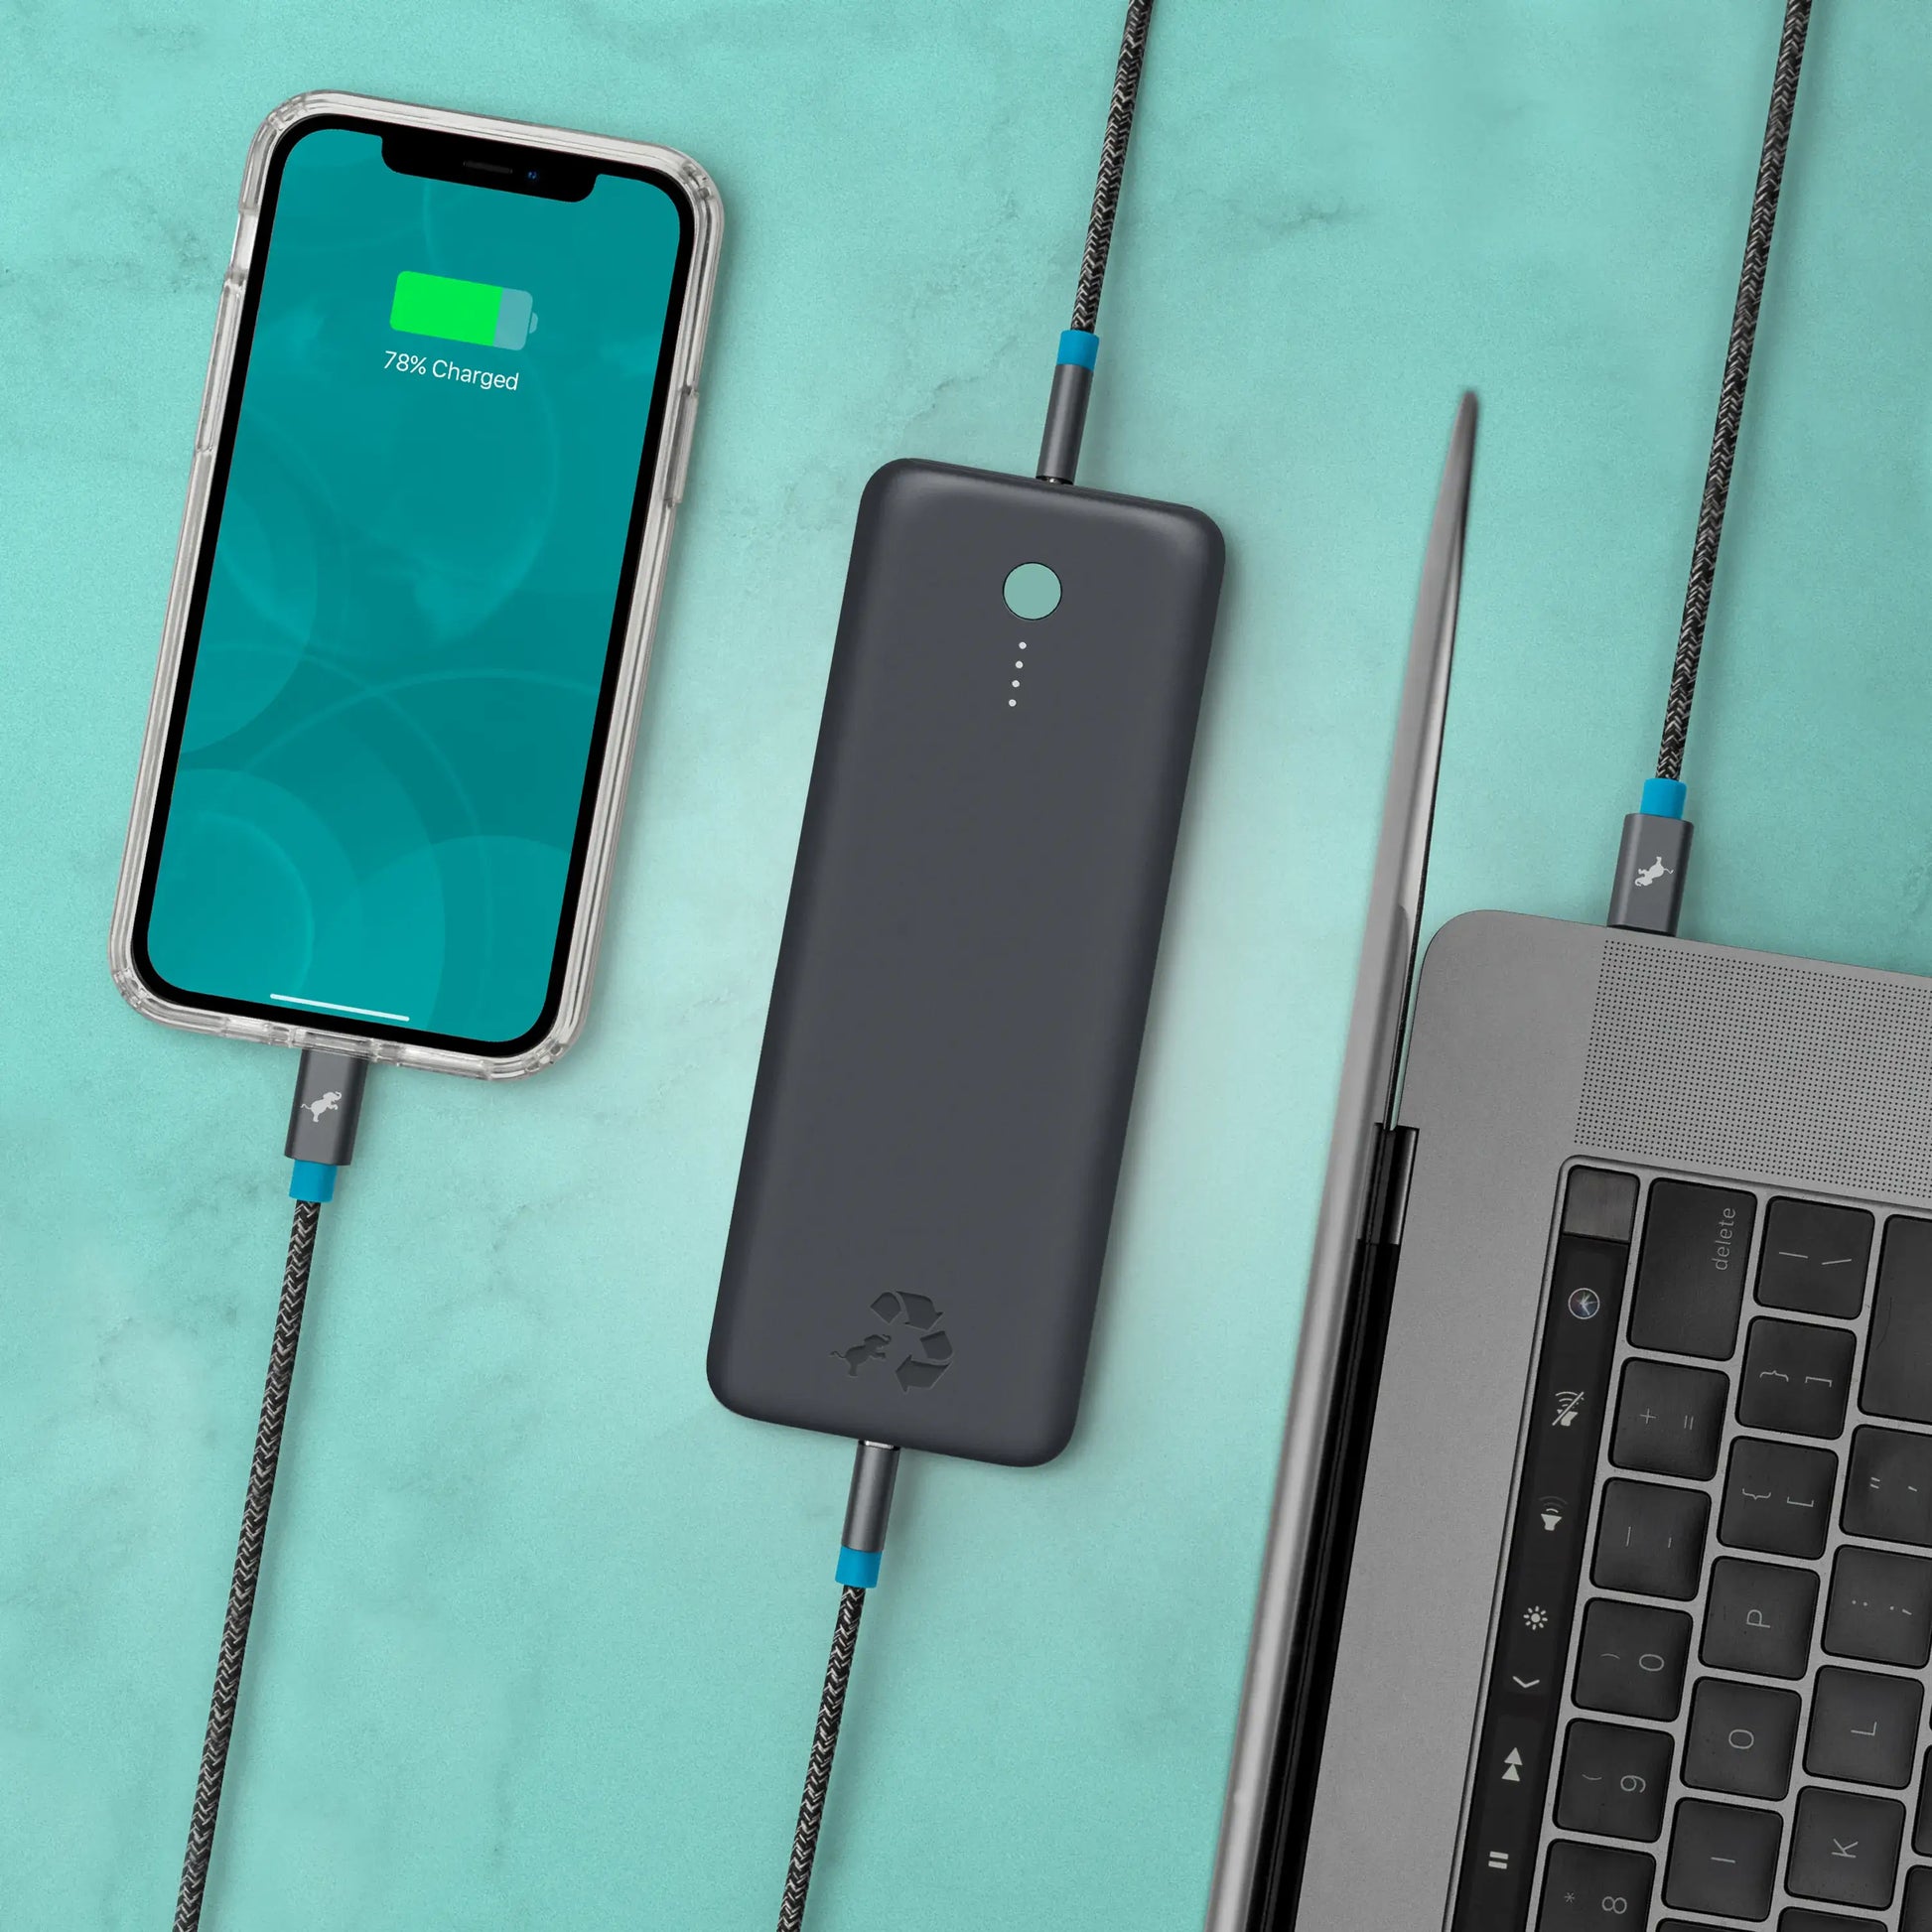 Large dark gray portable charger with green button connected to cell phone and laptop.